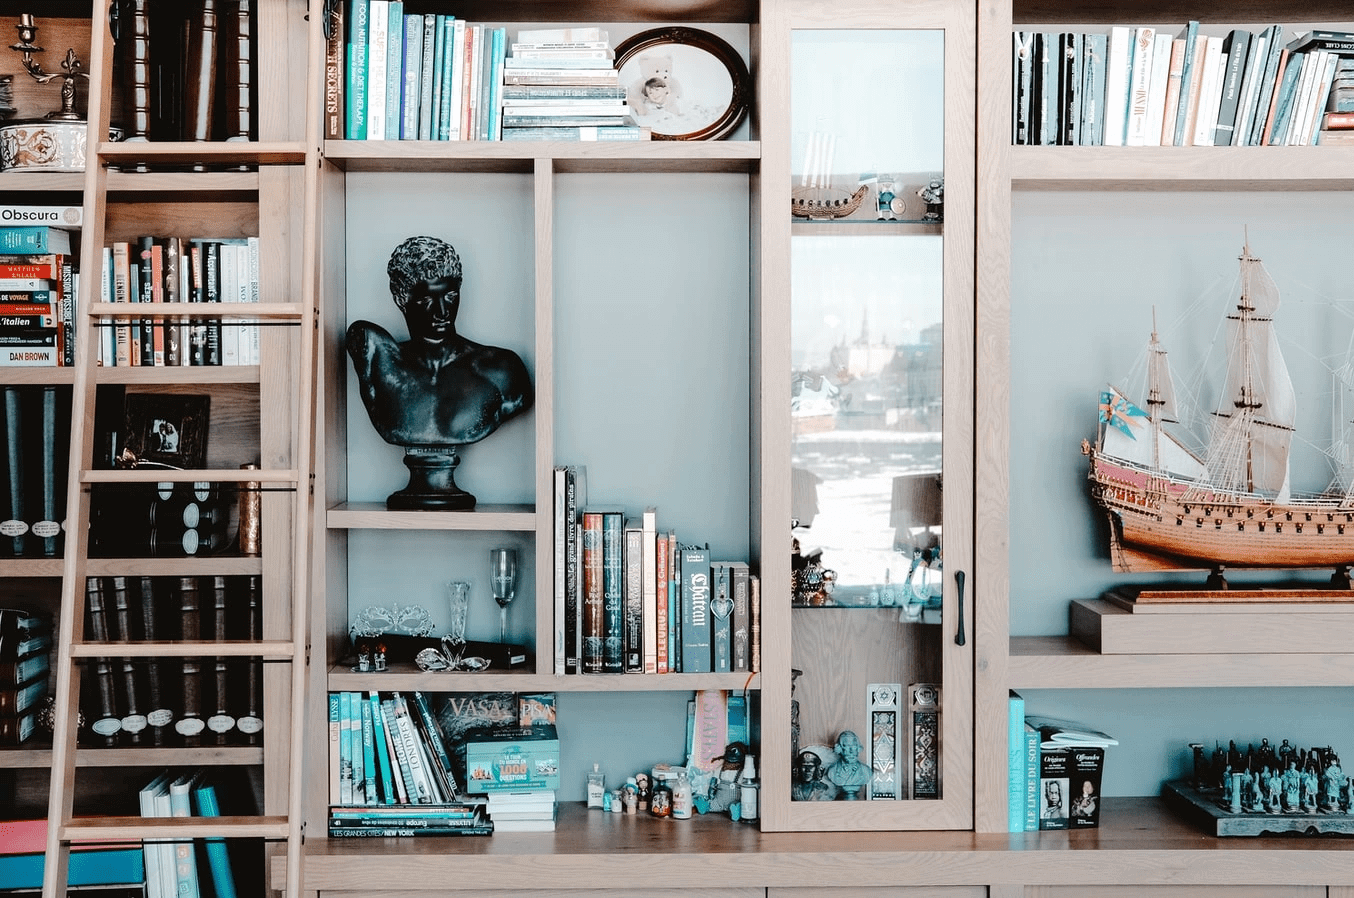 Use a Tall Bookcase and Add Objects to the Room